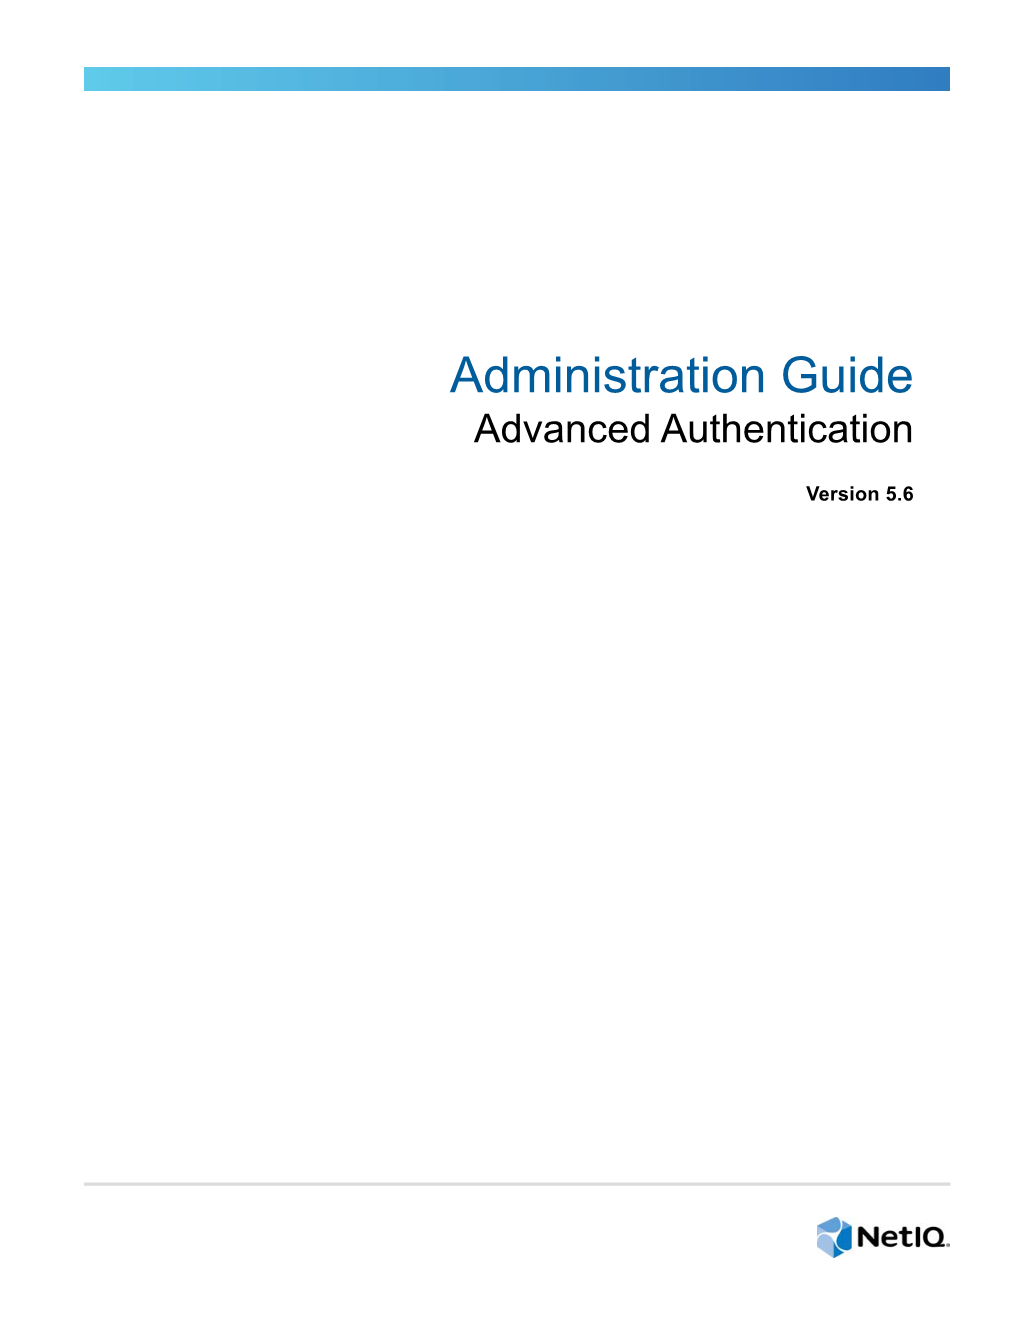 Administration Guide Advanced Authentication